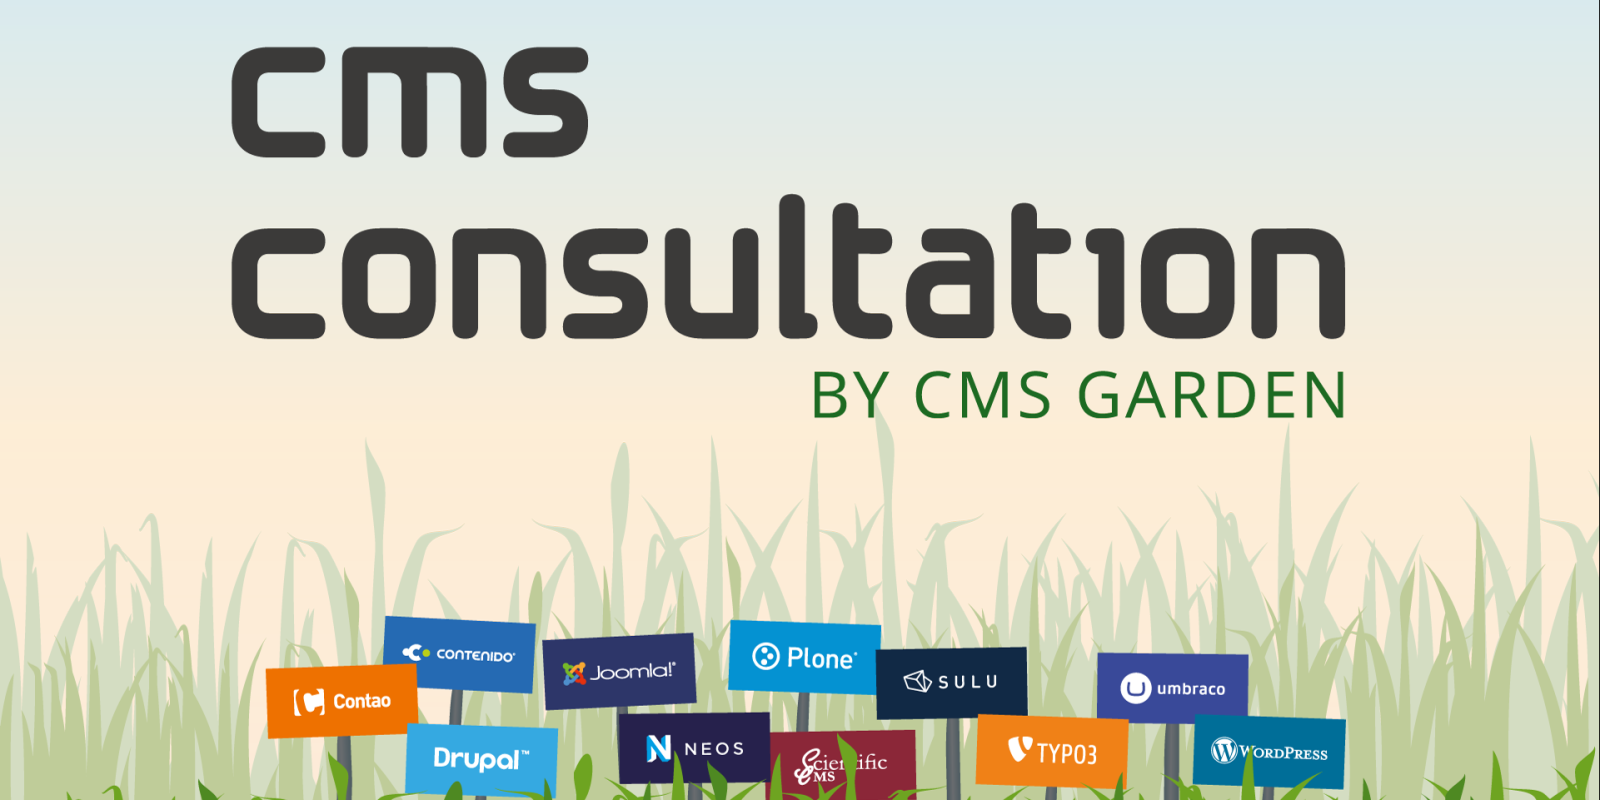 CMS consultation by CMS Garden, background illustration: CMS logos on signposts in a meadow in front a sunrise-colored sky